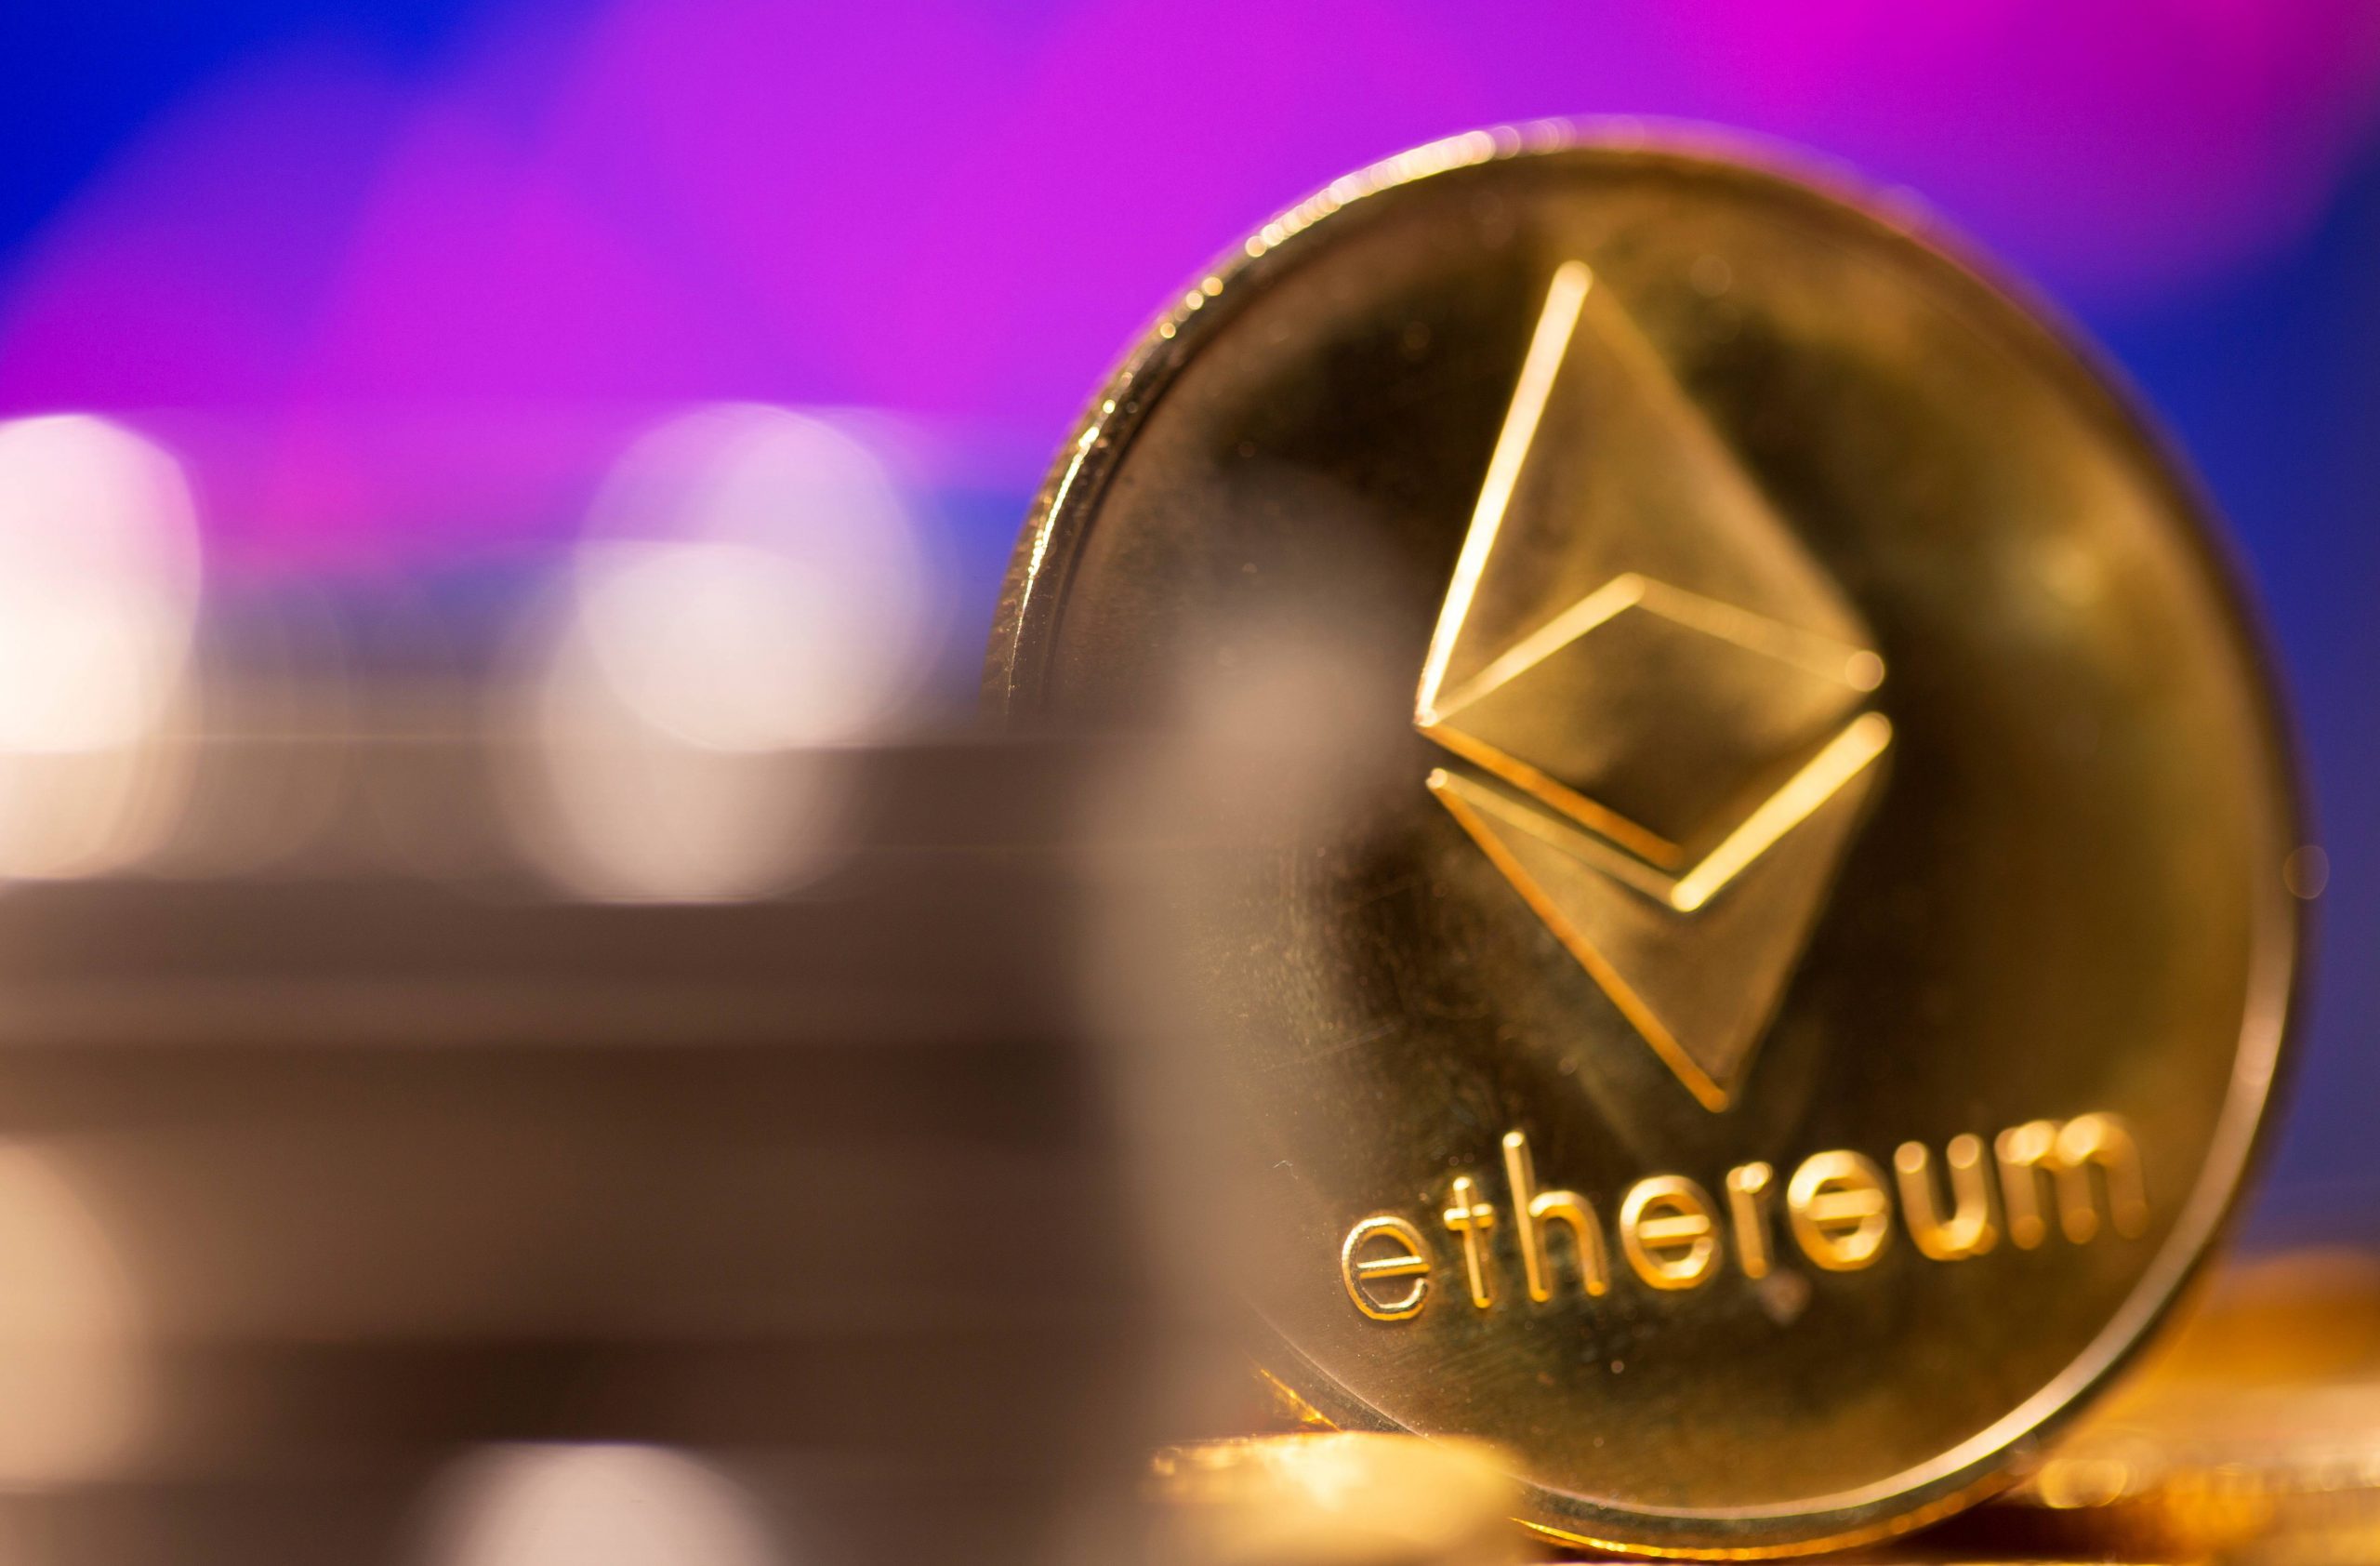 Bitcoin Ethereum Break Out With Rising Buying Pressure